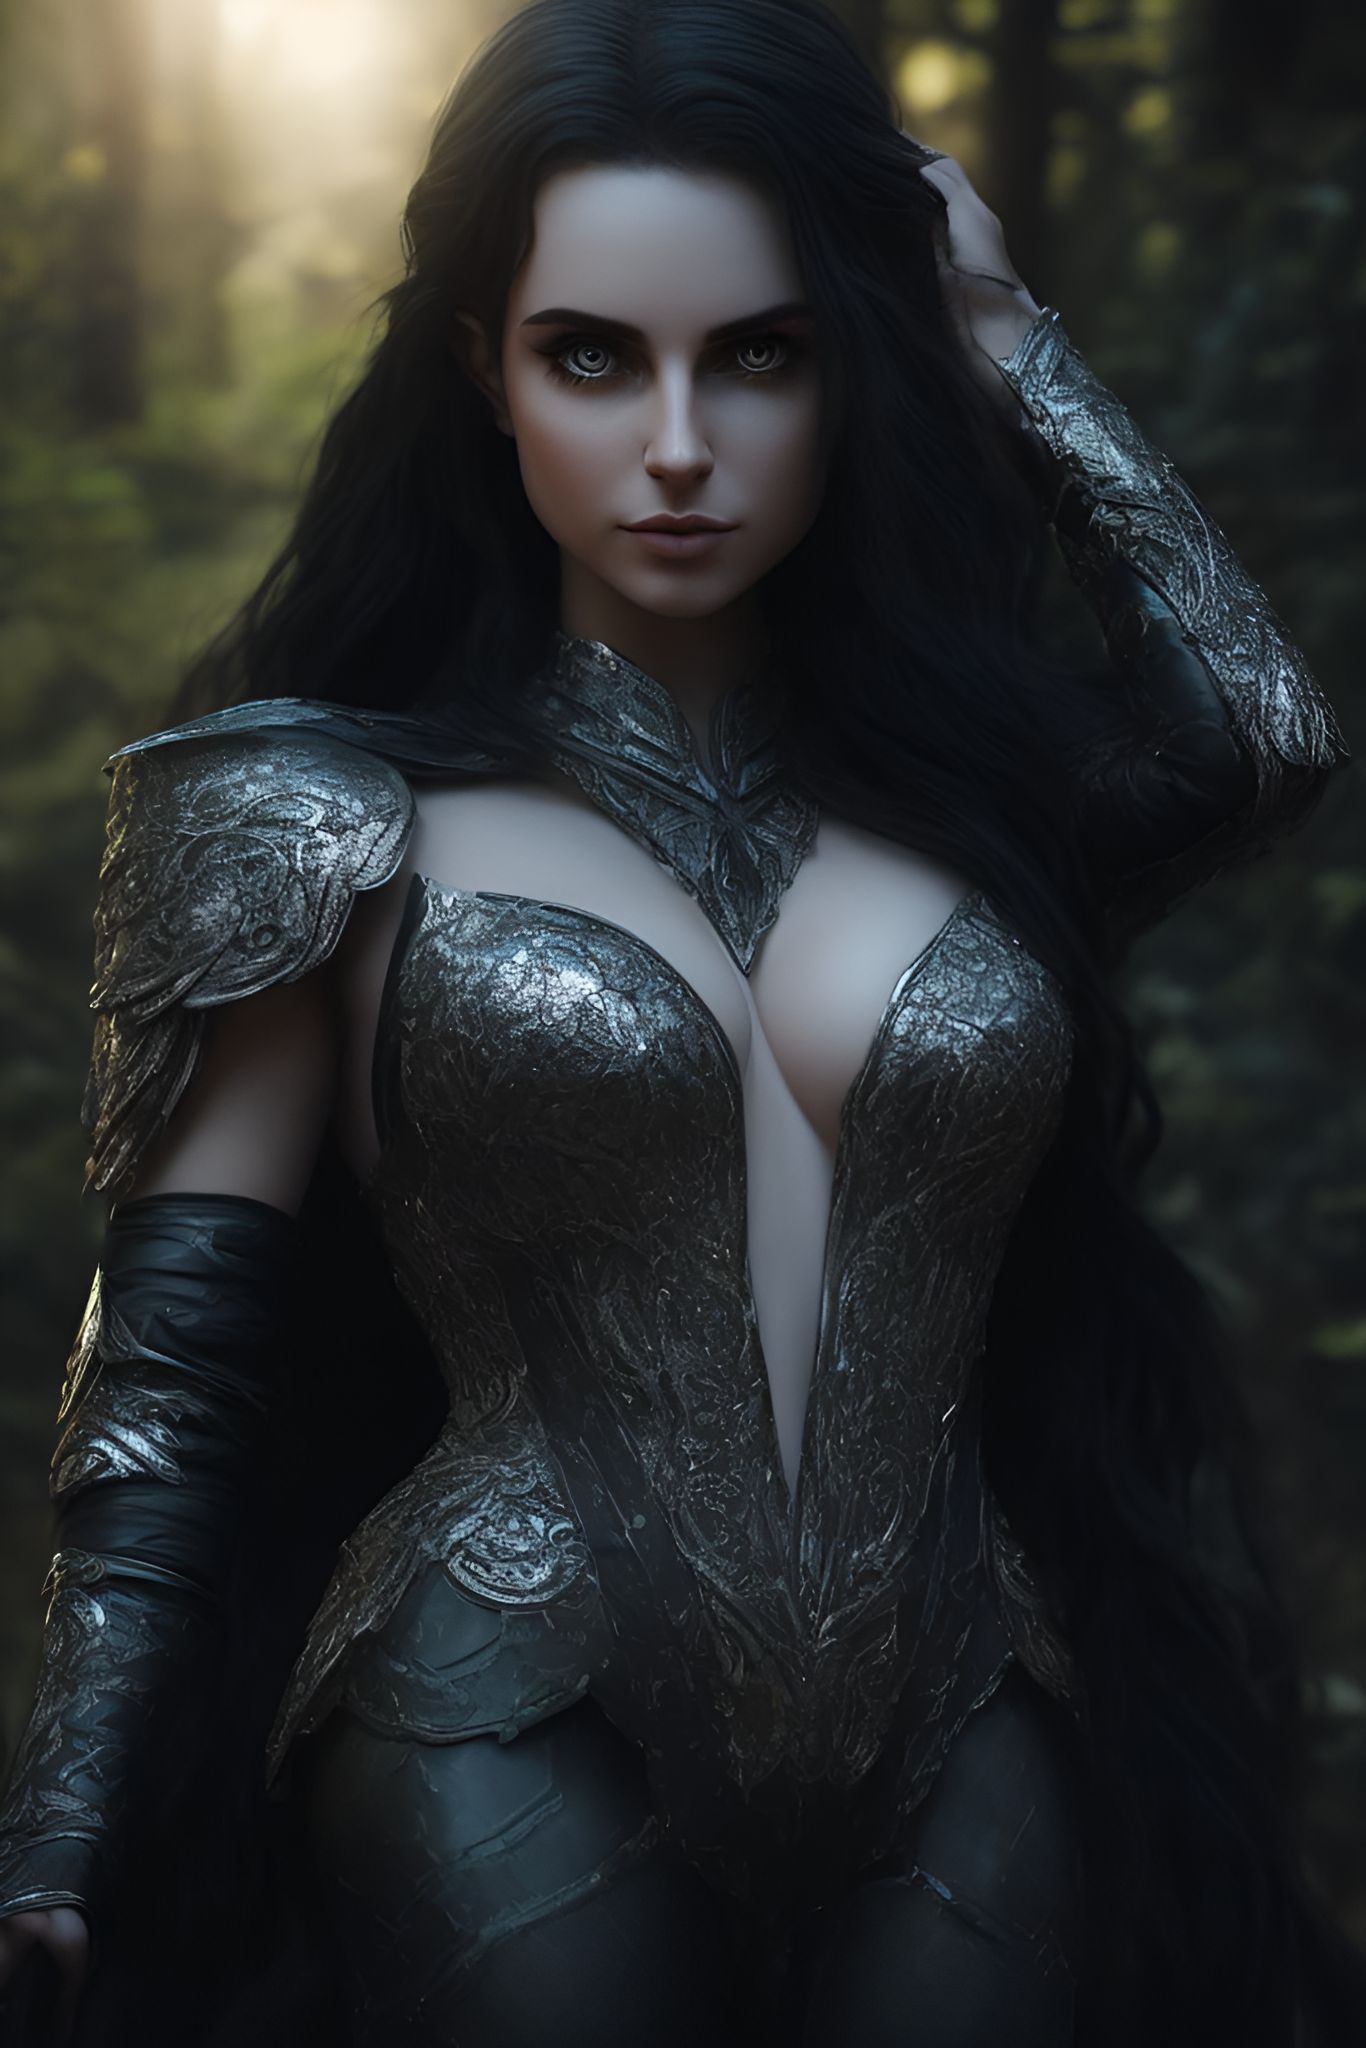 salty-yak180: photo of female warrior(Florence Look Glamour hot